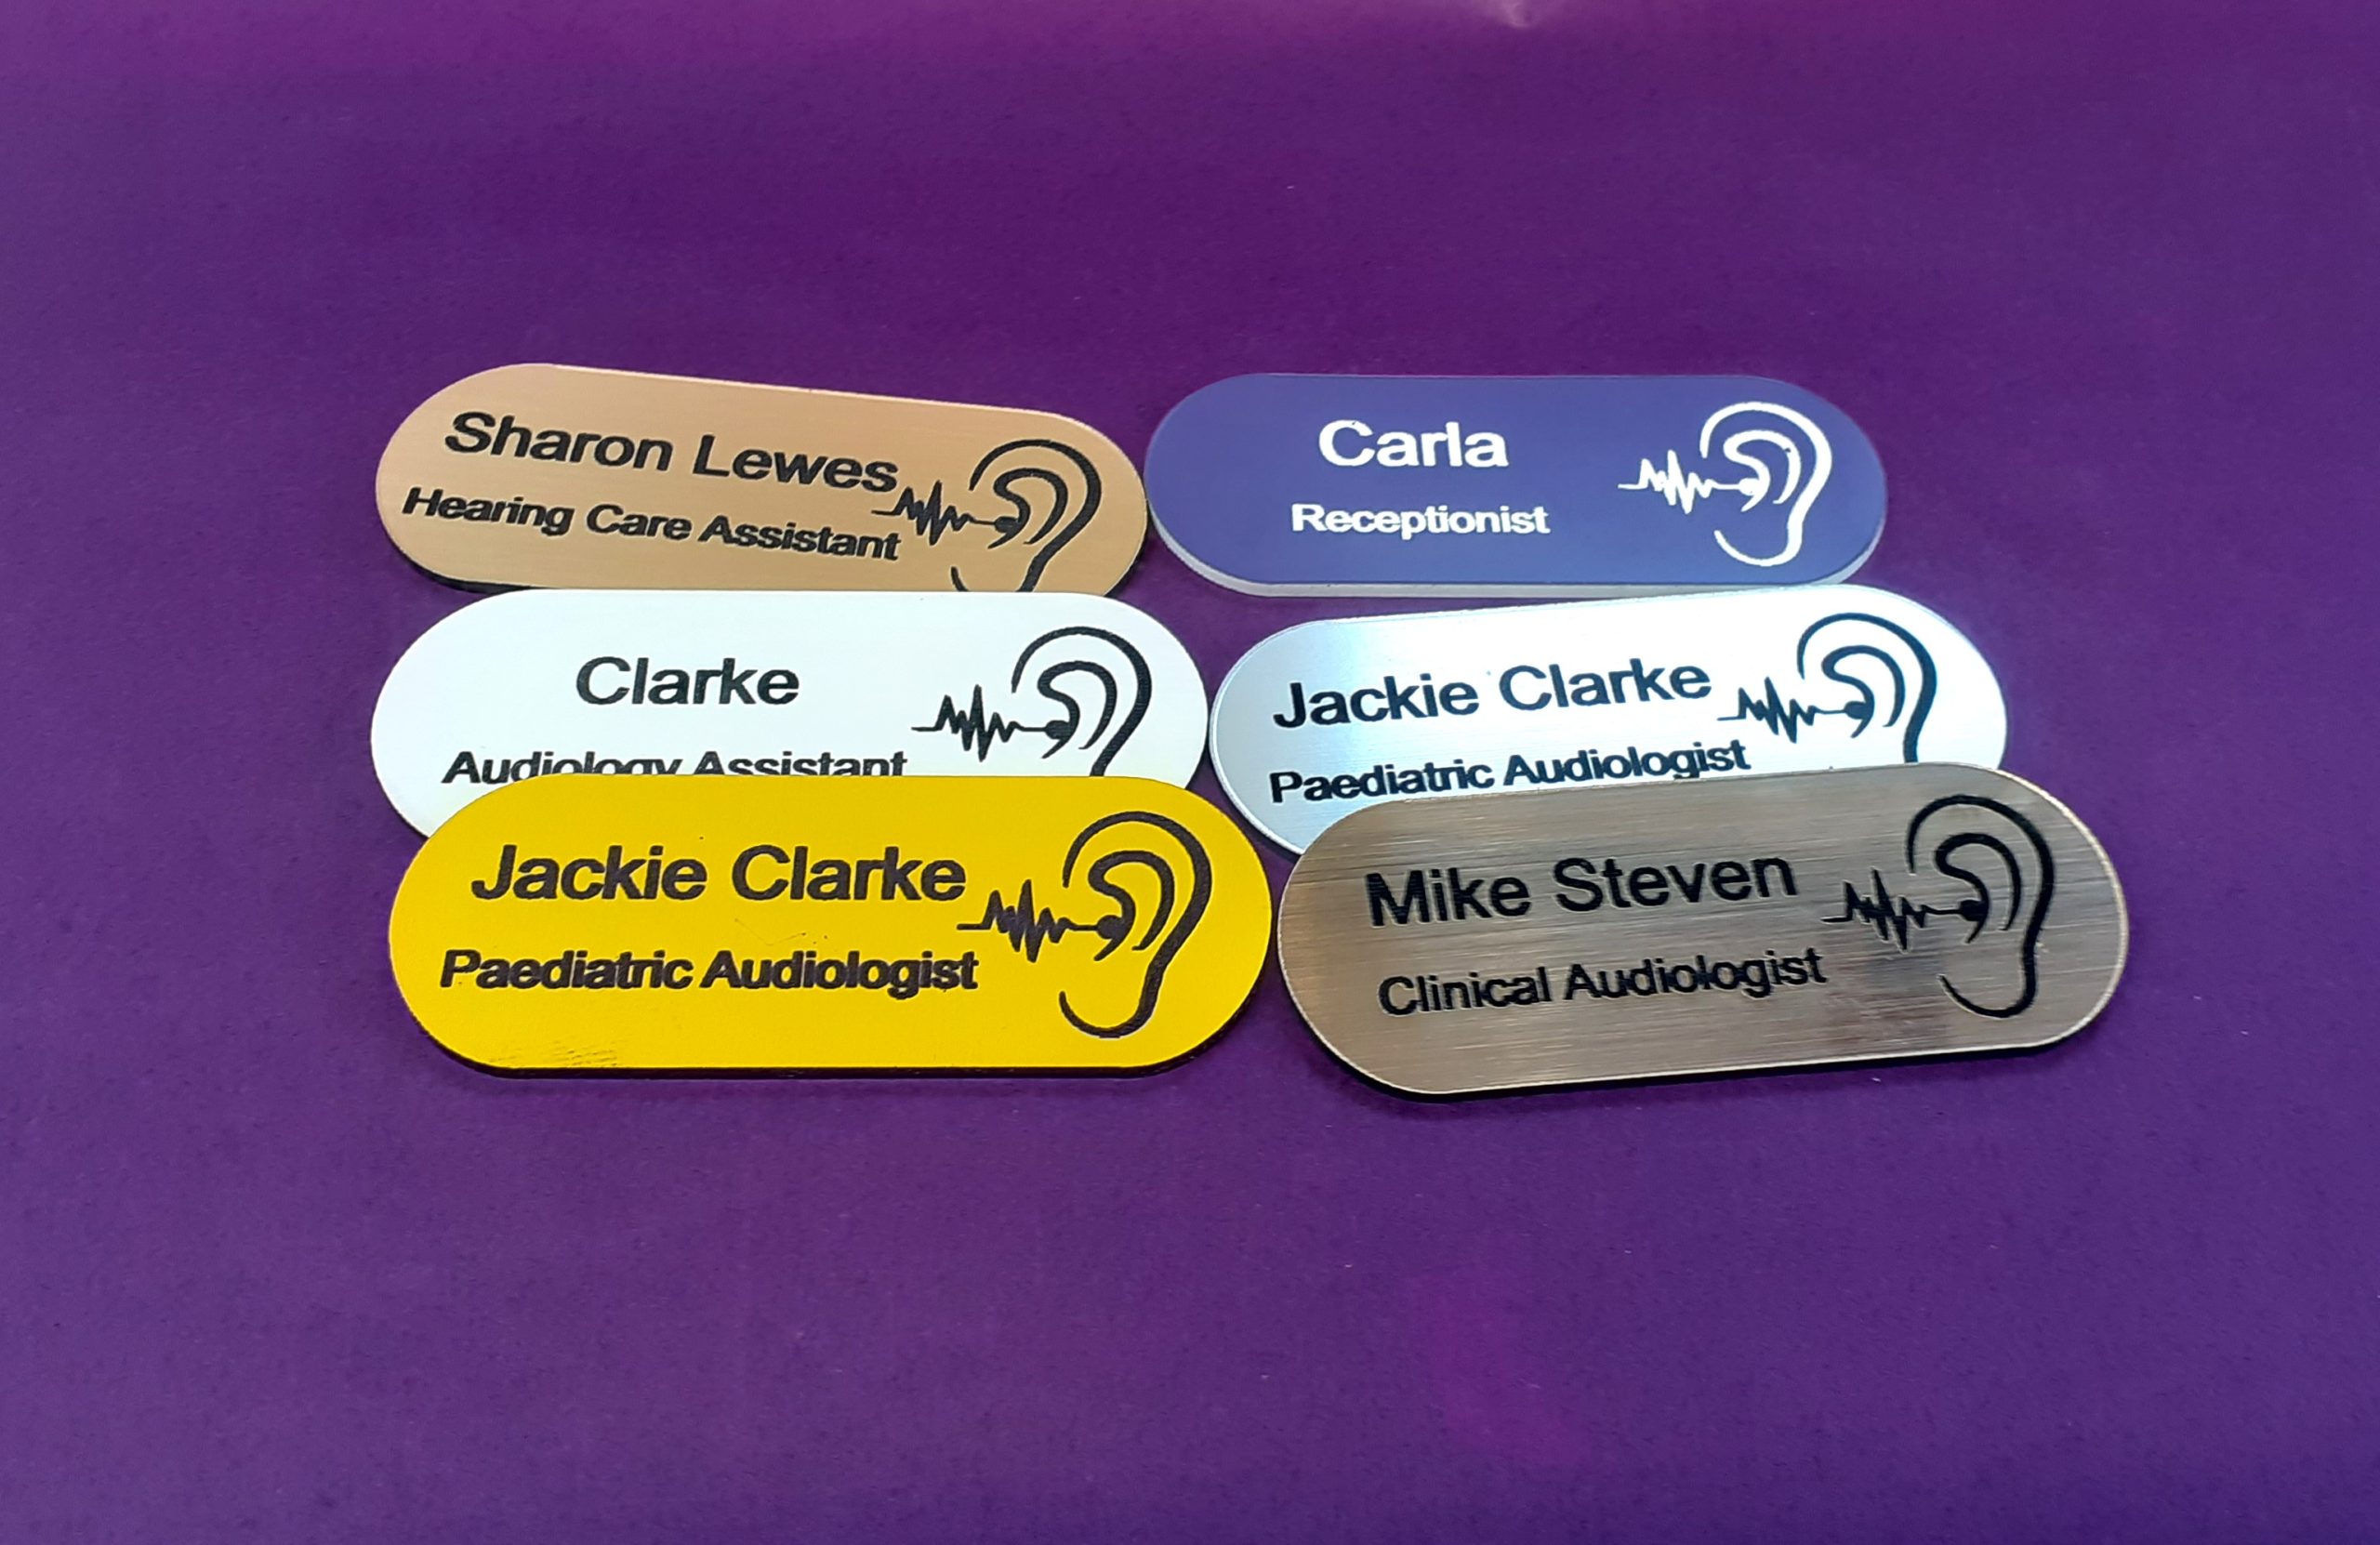 The hearing aid logo makes them suitable for Audio professionals or health-related events. The pill-shaped design and colourful variations contribute to a visually appealing and customisable identification solution.